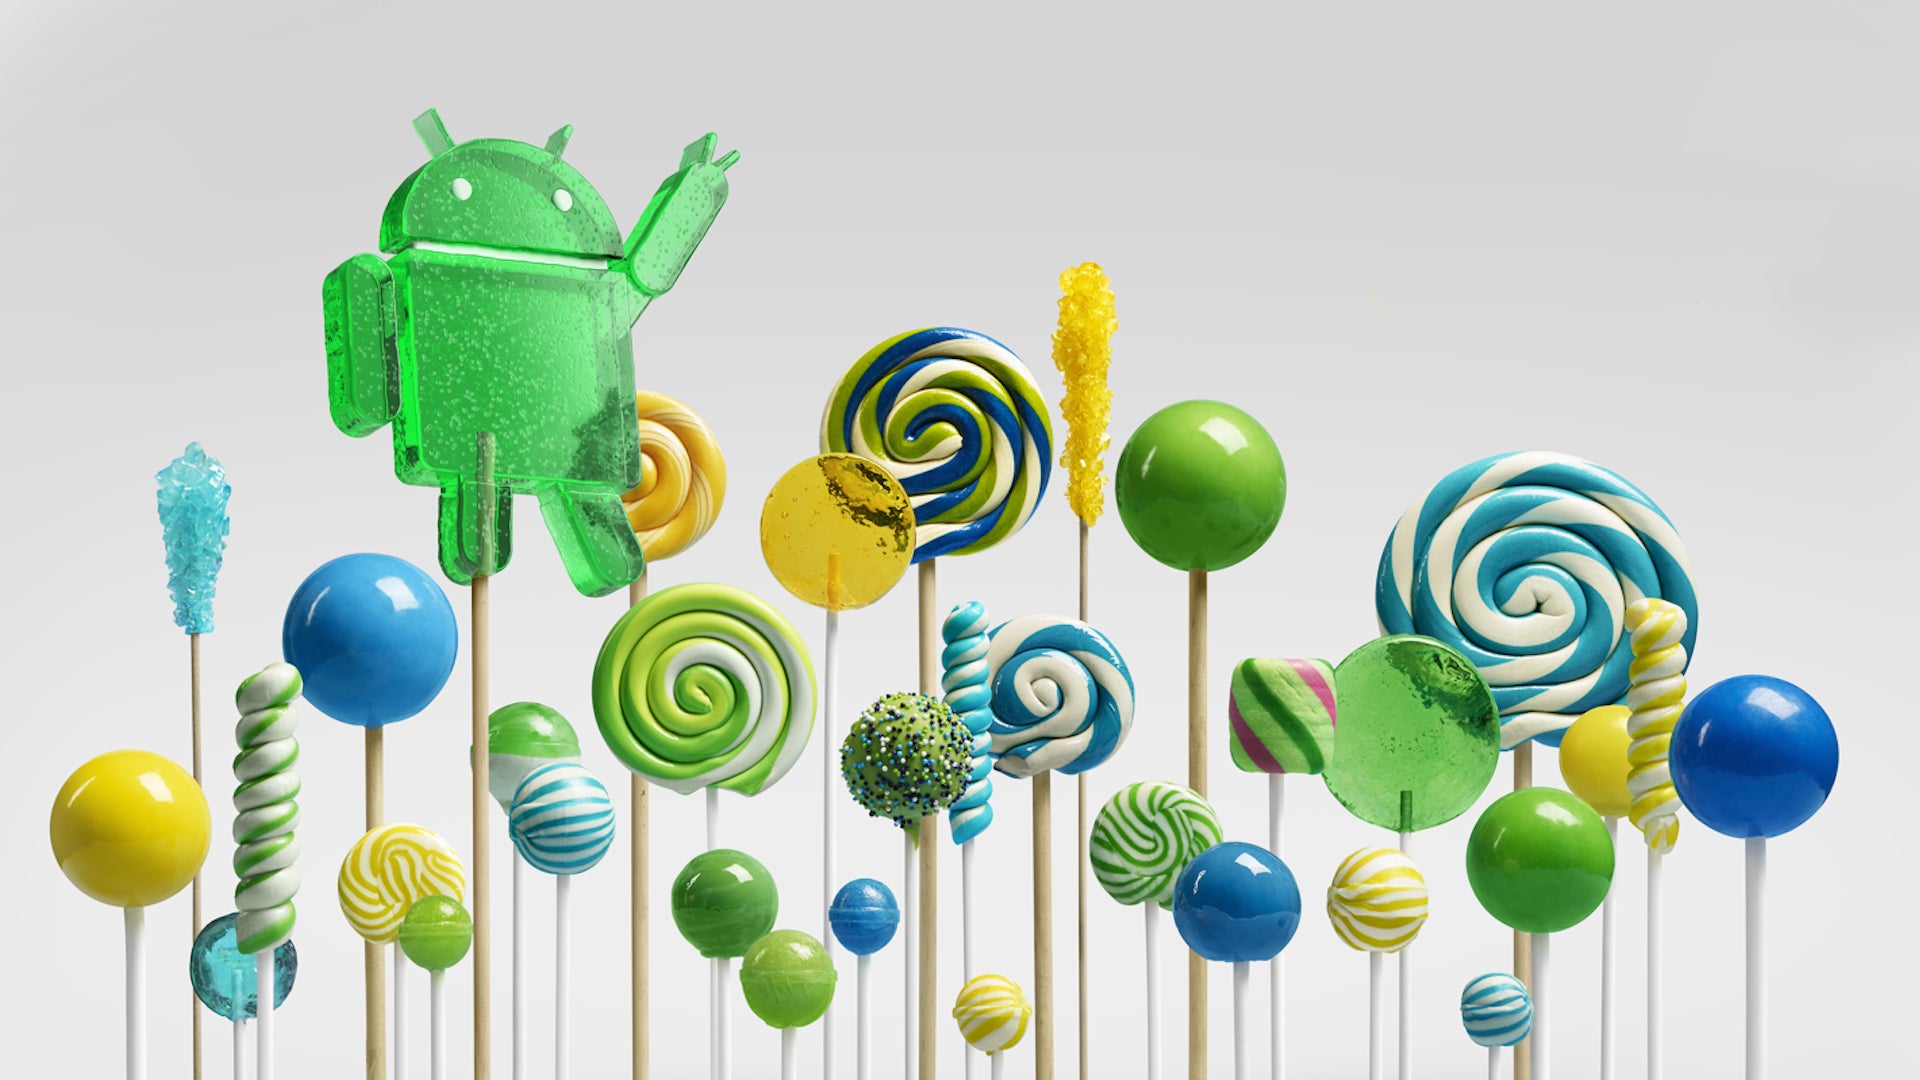 Celebrate Android L With These Lollipop Wallpapers Android ドロイド君のデスクトップ壁紙集 Naver まとめ